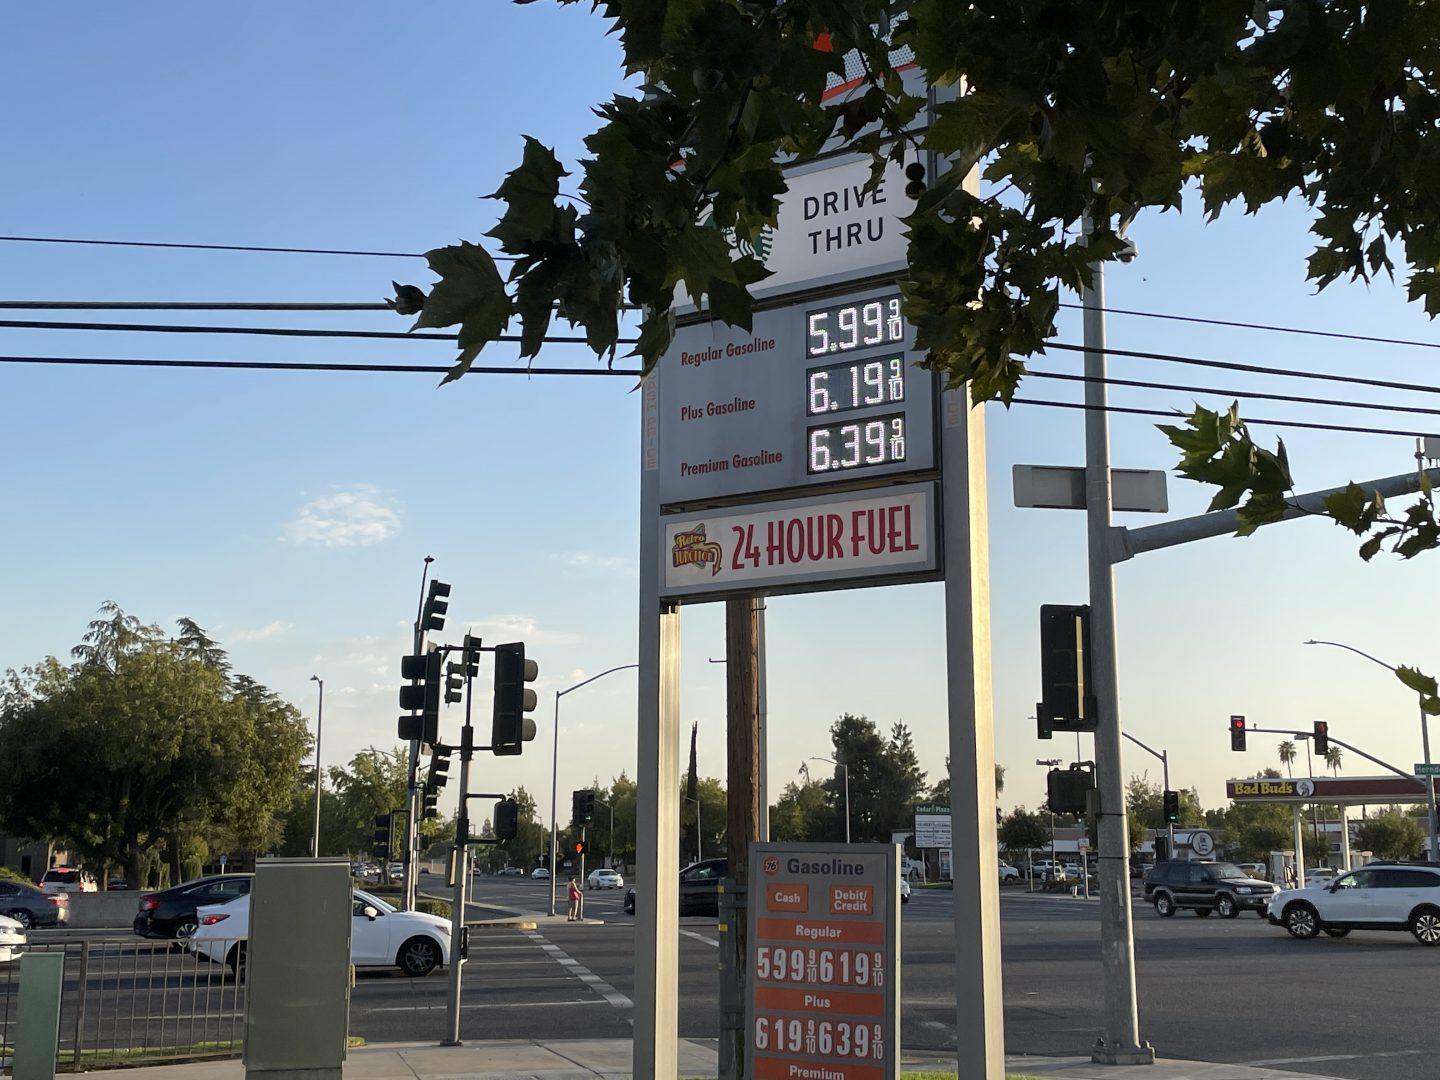 Rampant+inflation+takes+a+bigger+bite+out+of+food%2C+gas+budget+for+Fresno+State+students